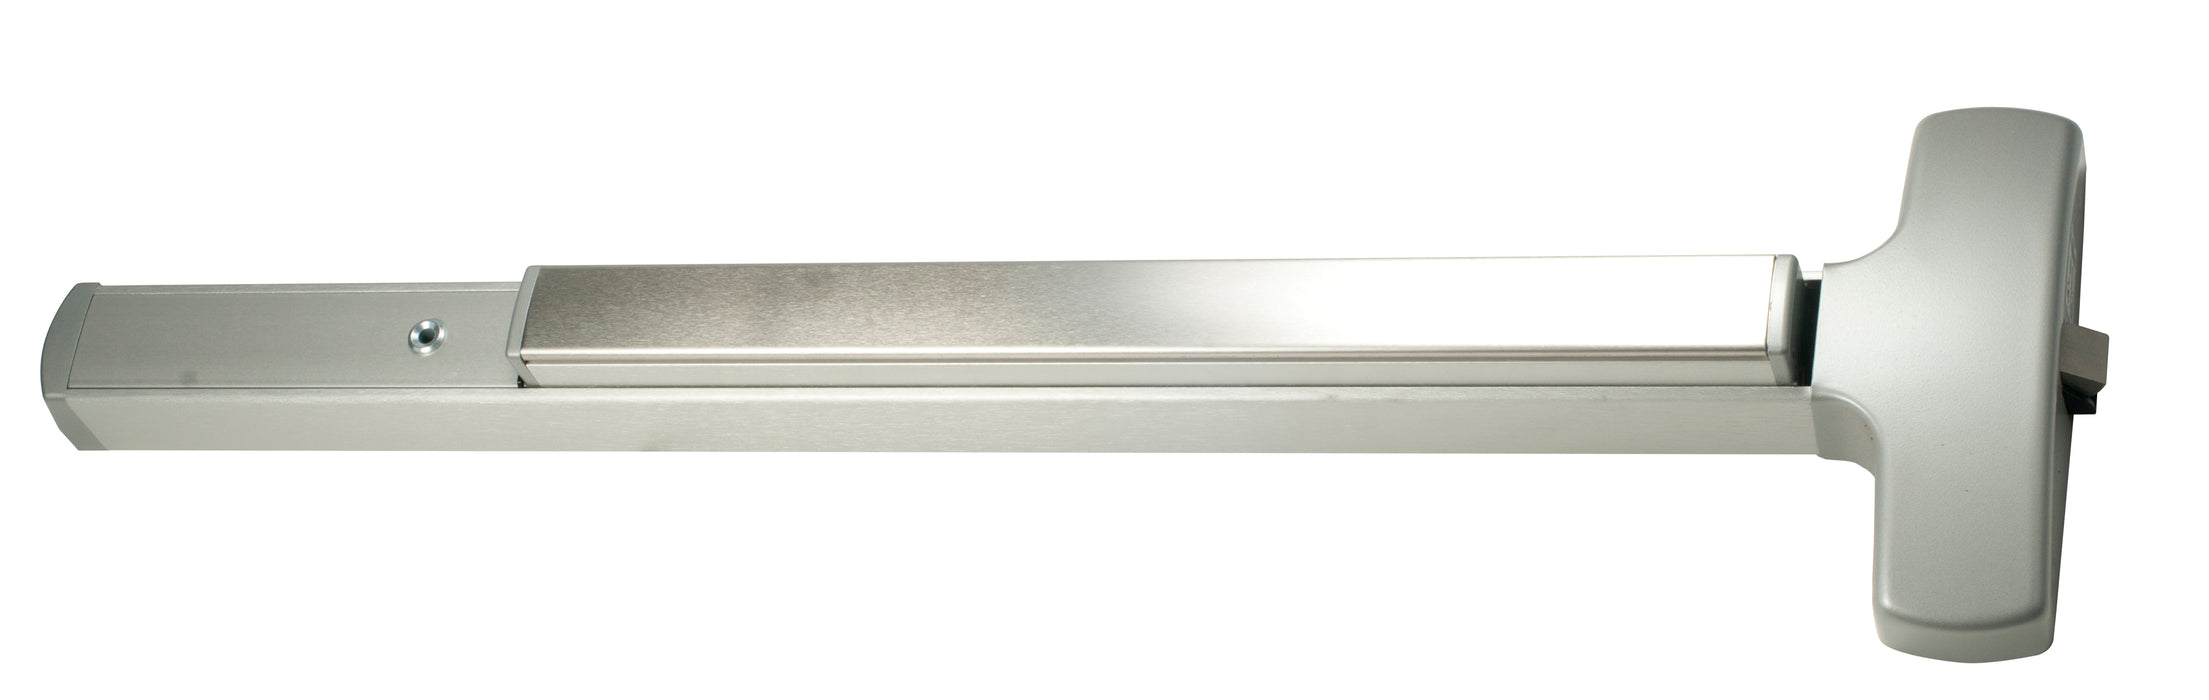 Narrow Rim Exit Device Grooved Case; 628 Anodized Aluminum Finish